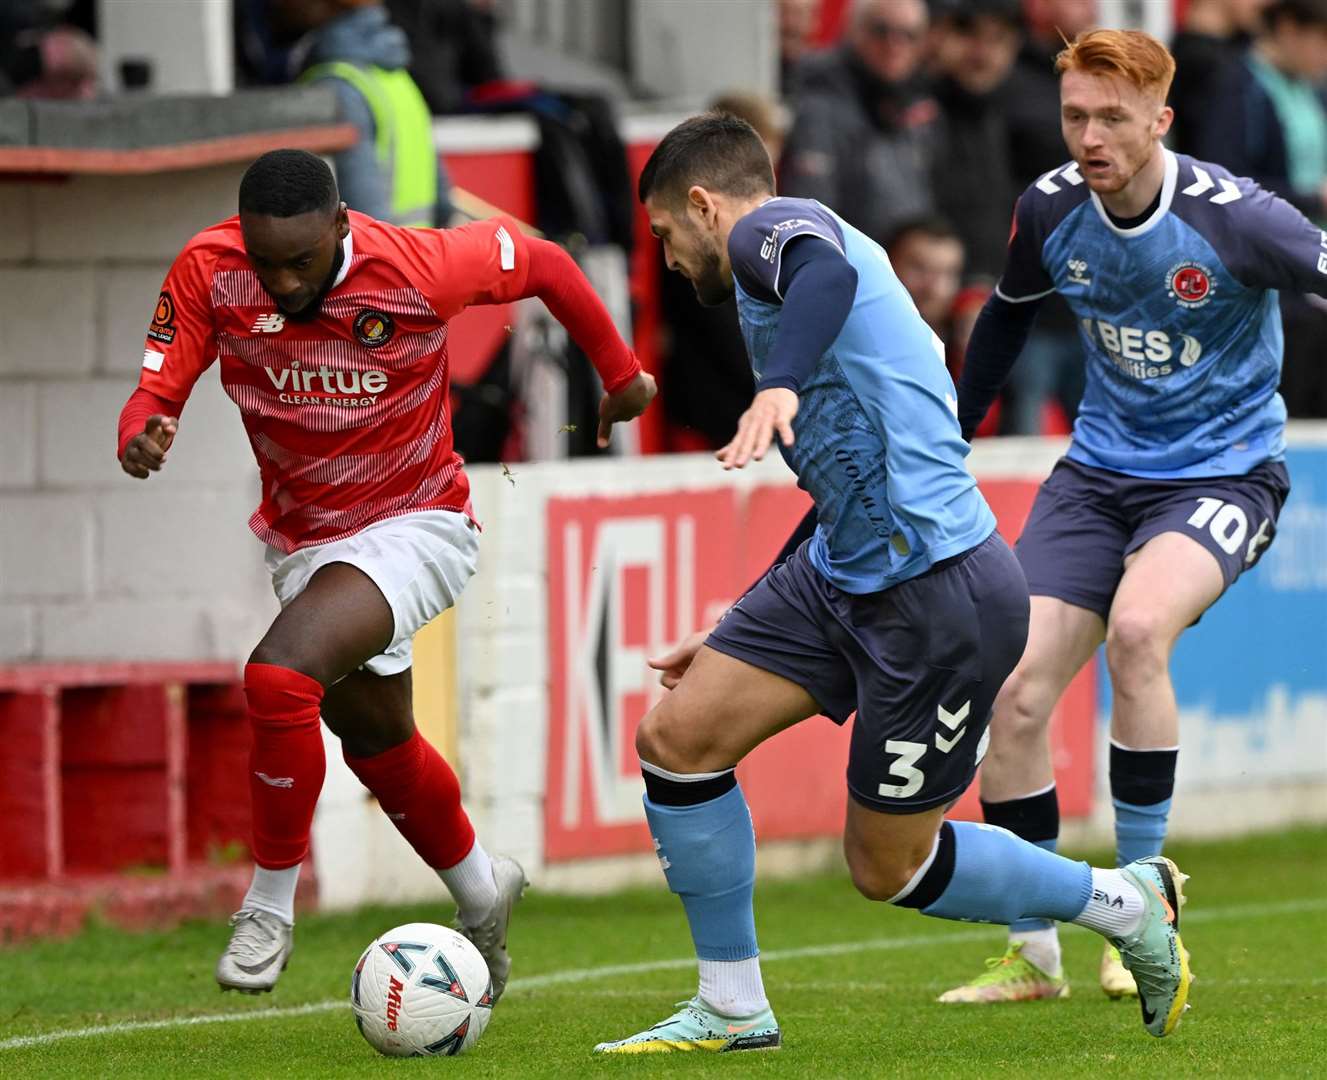 Ebbsfleet's Omari Sterling-James charges forward on Sunday. Picture: Keith Gillard